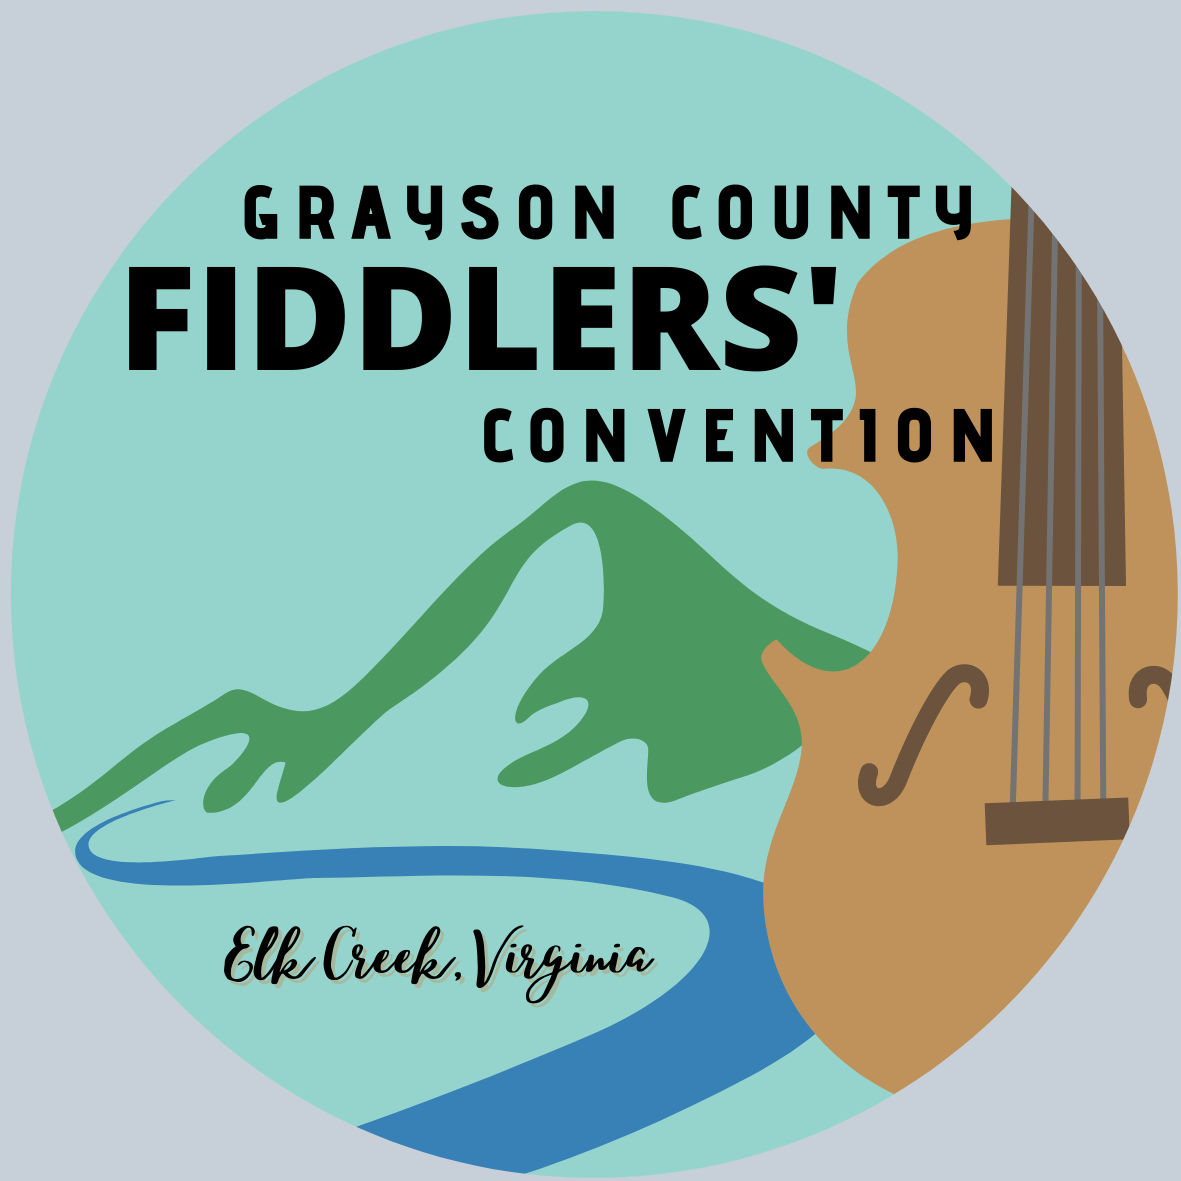 Grayson County Fiddler’s Convention